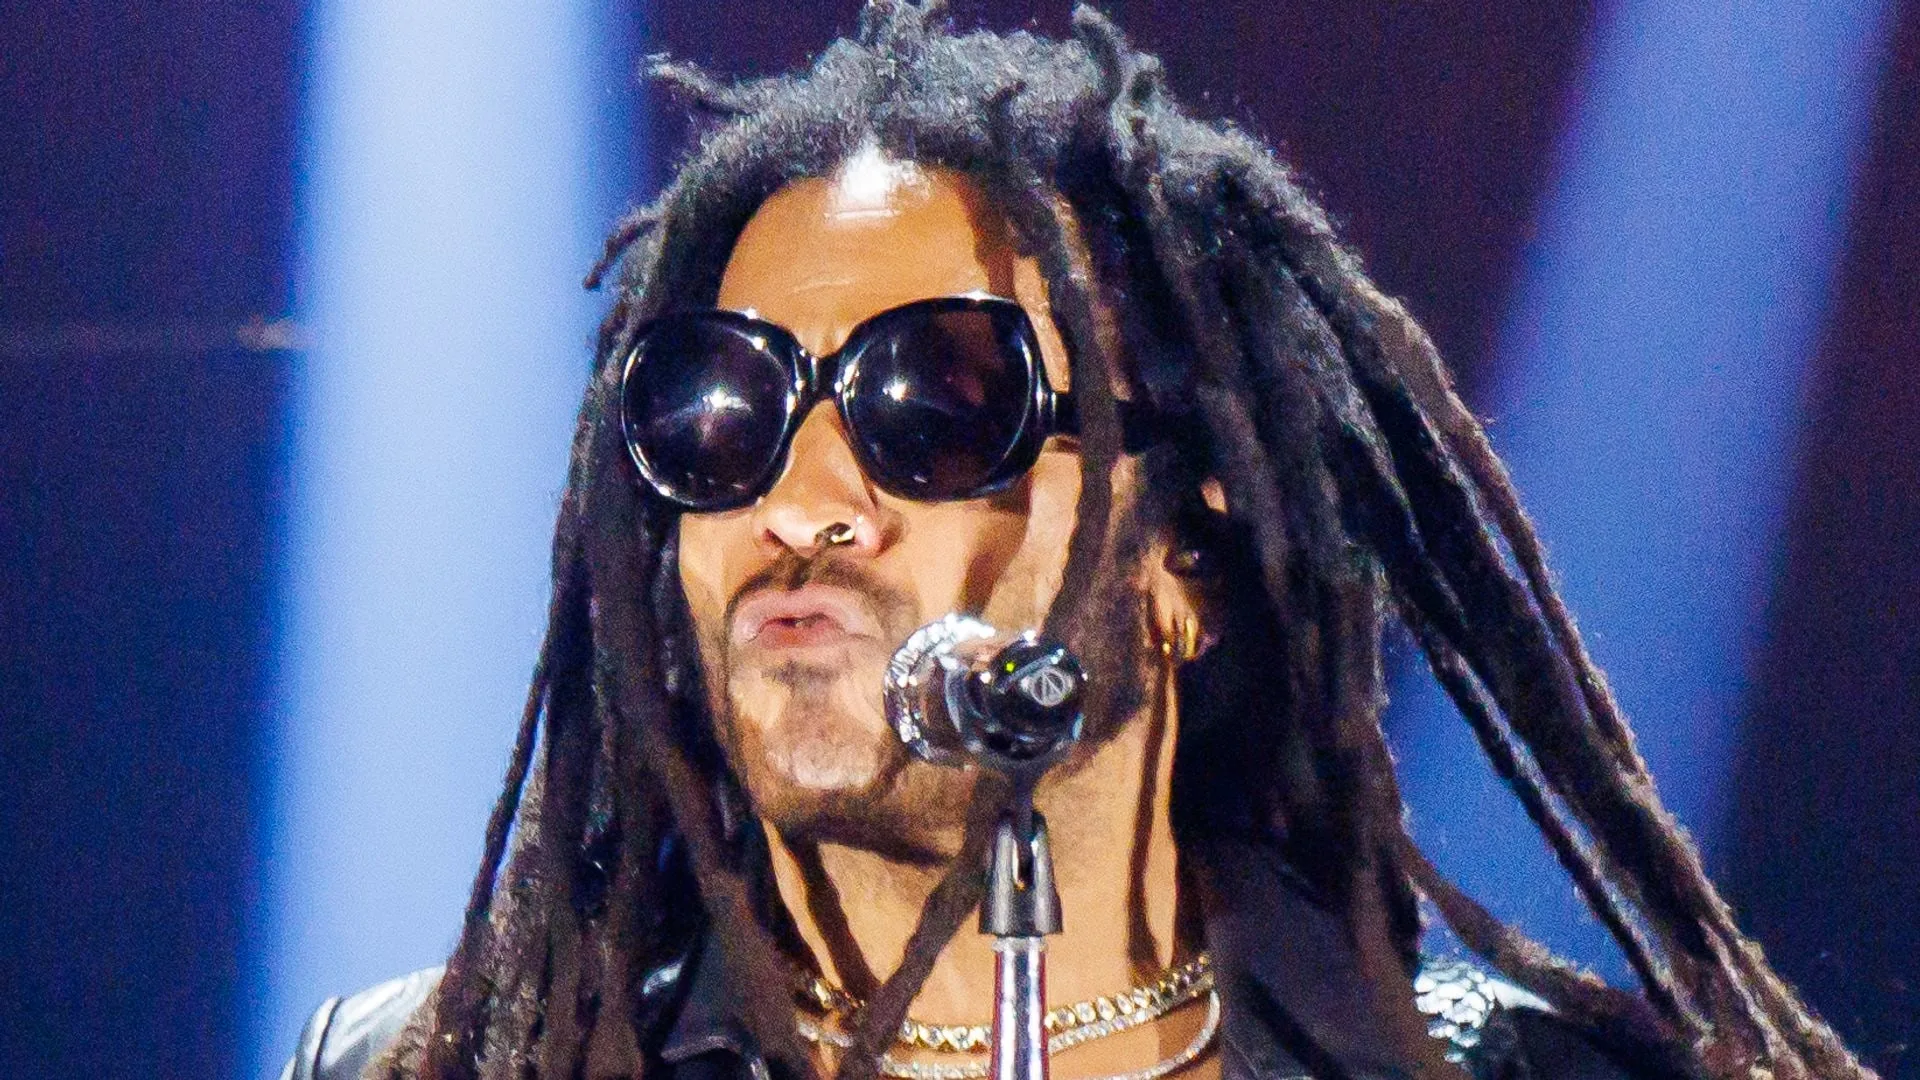 Top 10 Fascinating Facts About Lenny Kravitz